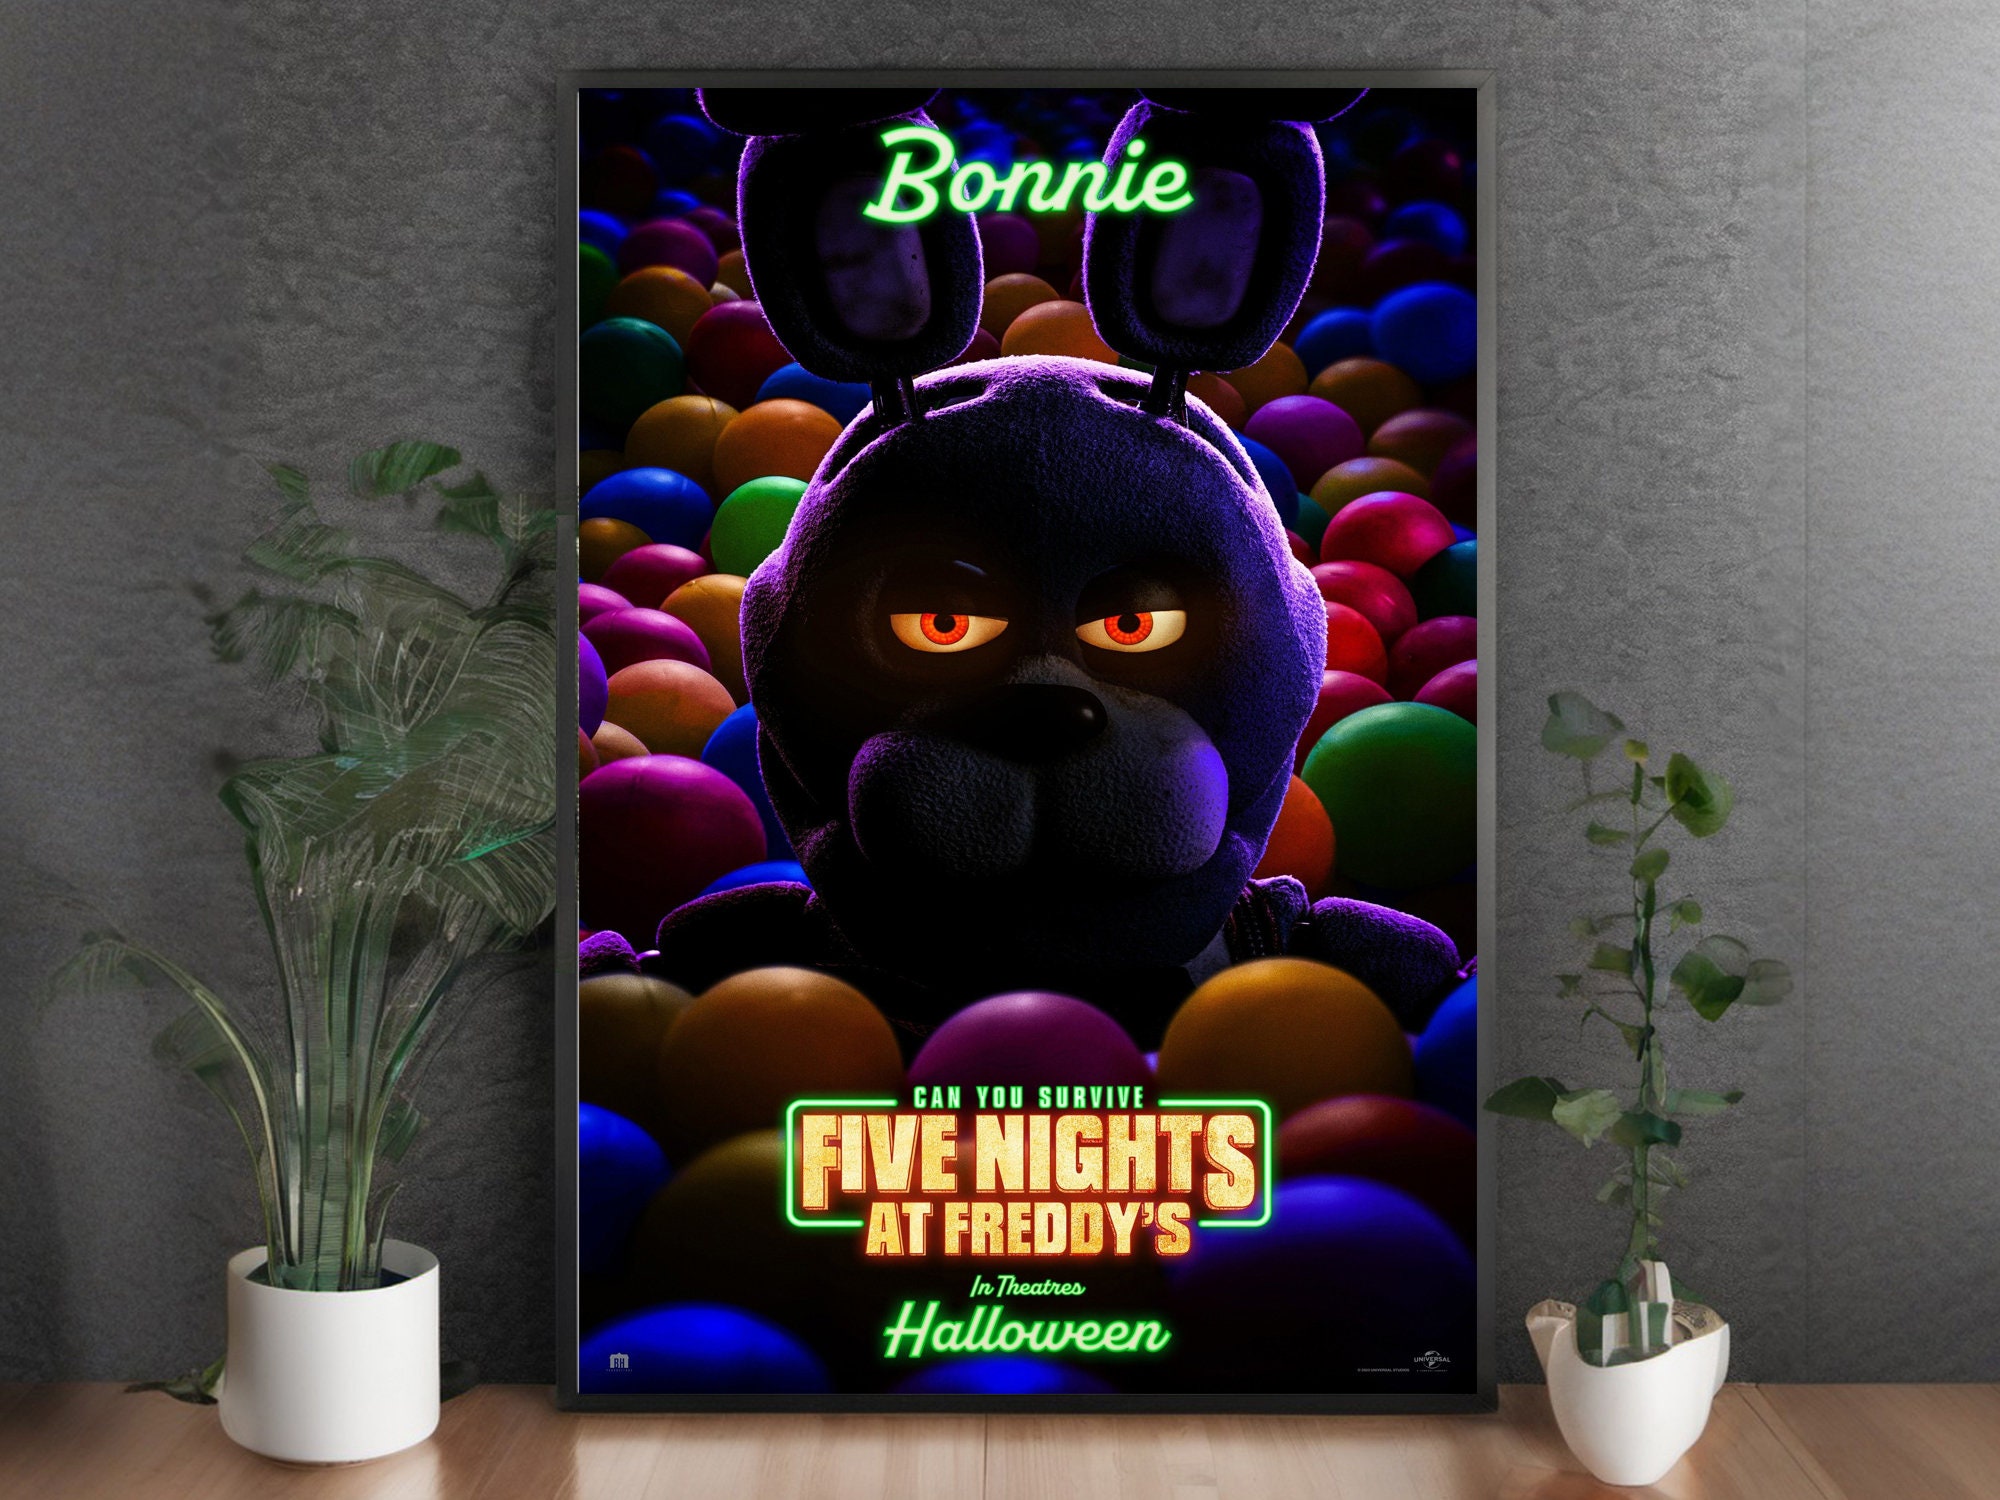 Five Nights at Freddys Movie posters